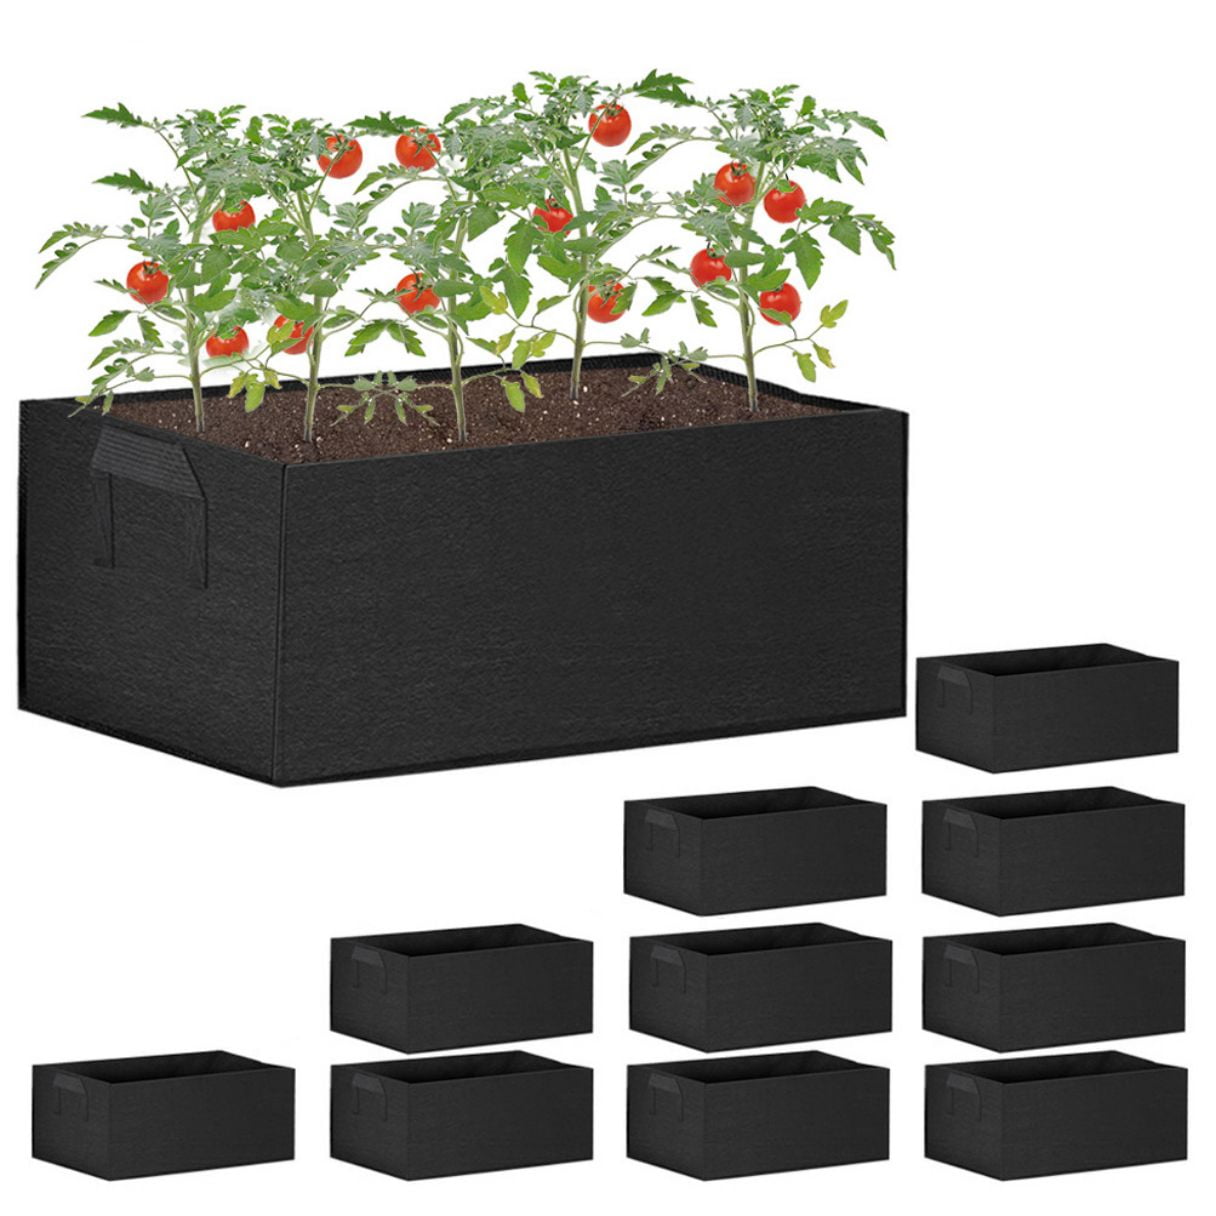 10x Lot Fabric Pots Plant Pouch Round Aeration Pot Container Vegetable Grow Bags 